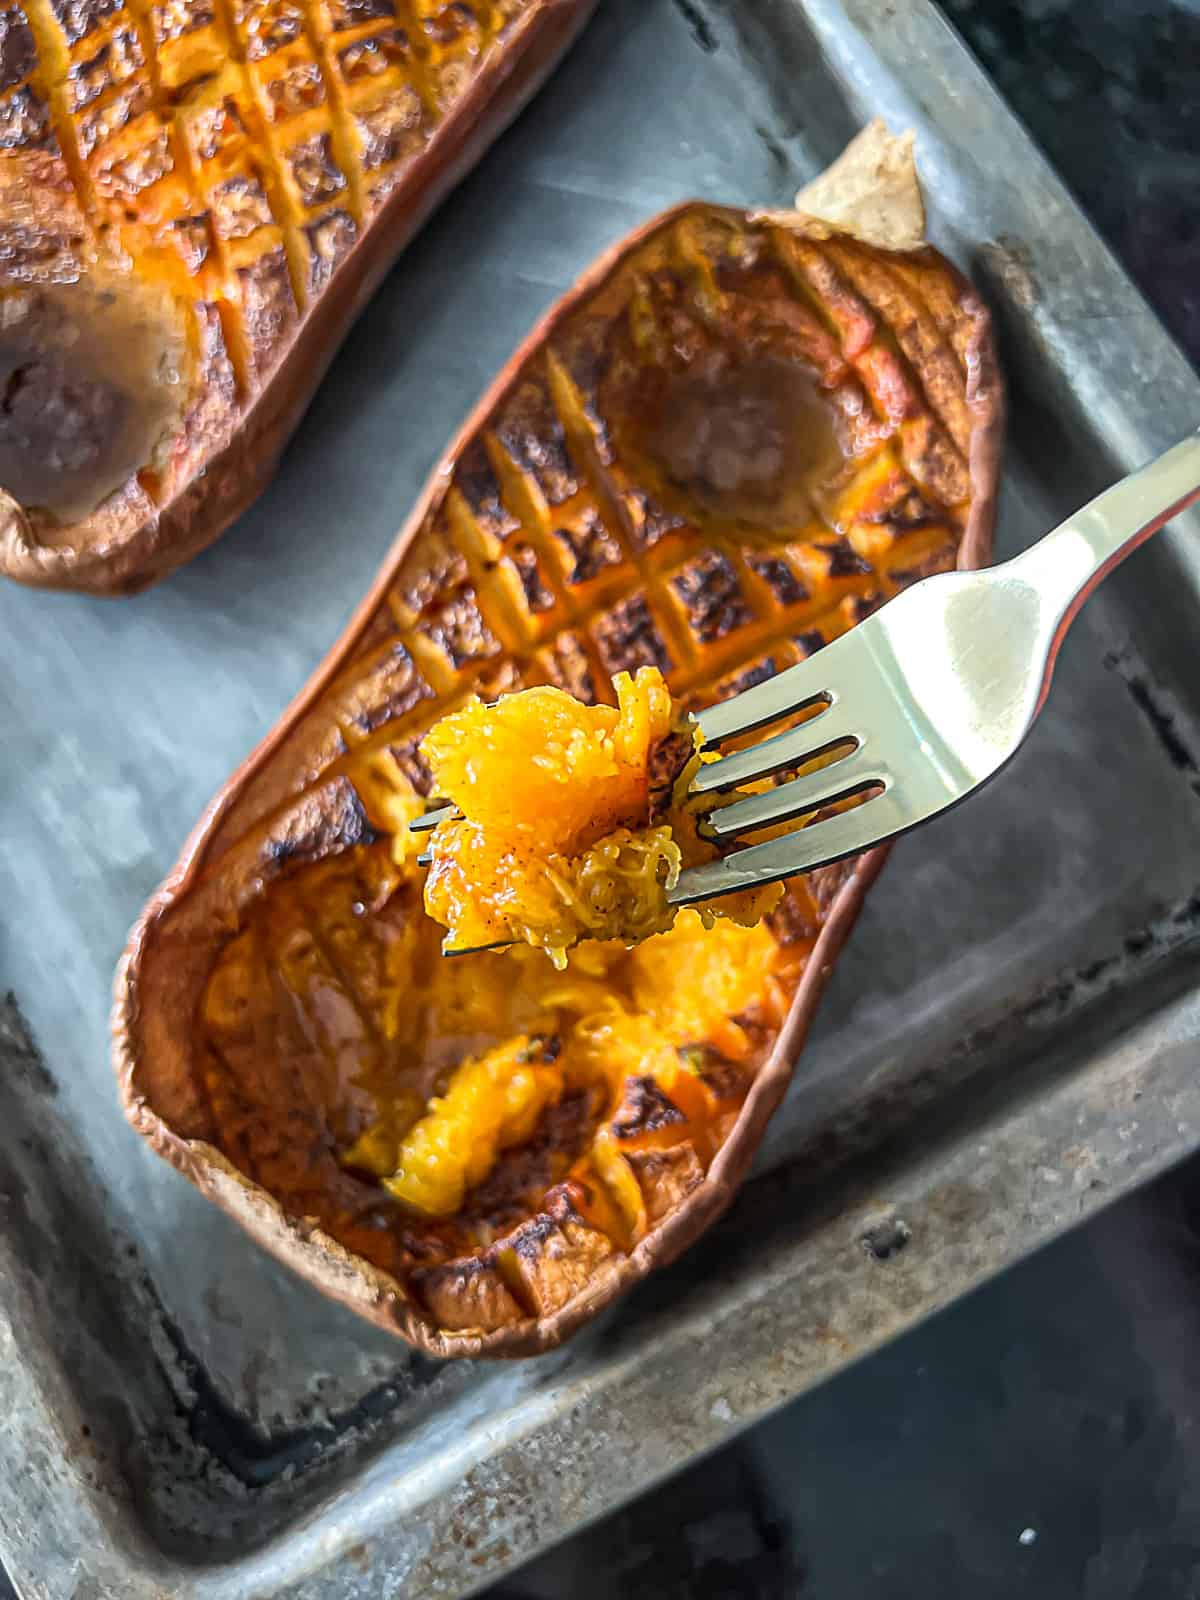 Traeger Smoked Butternut Squash Soft Cooked With a fork on a serving tray